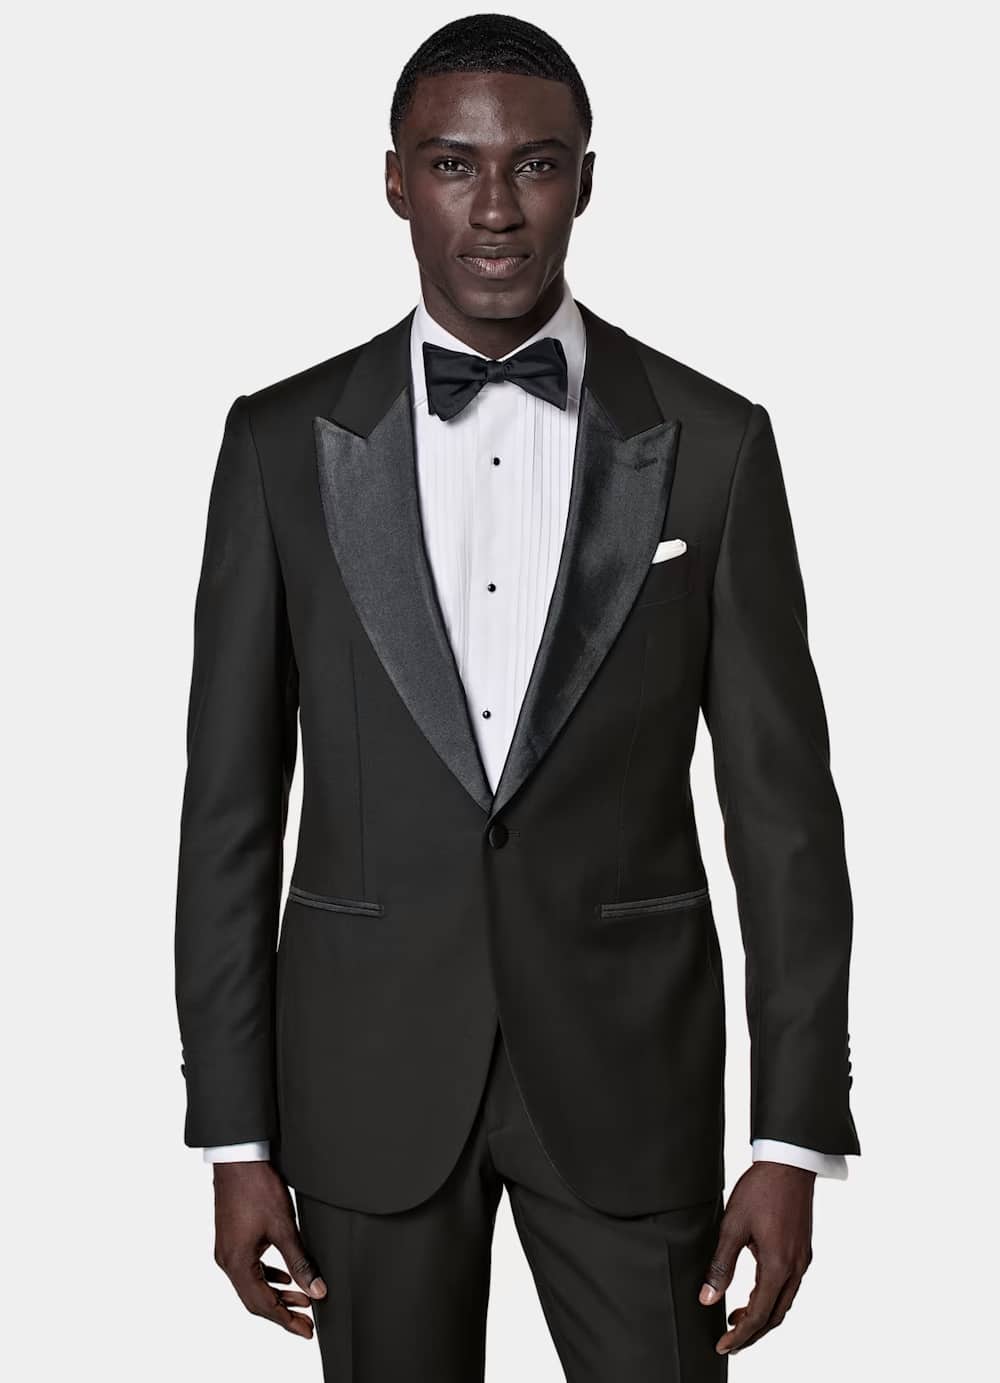 How to Wear a Tuxedo (A Black Tie Guide for Men) - The Modest Man